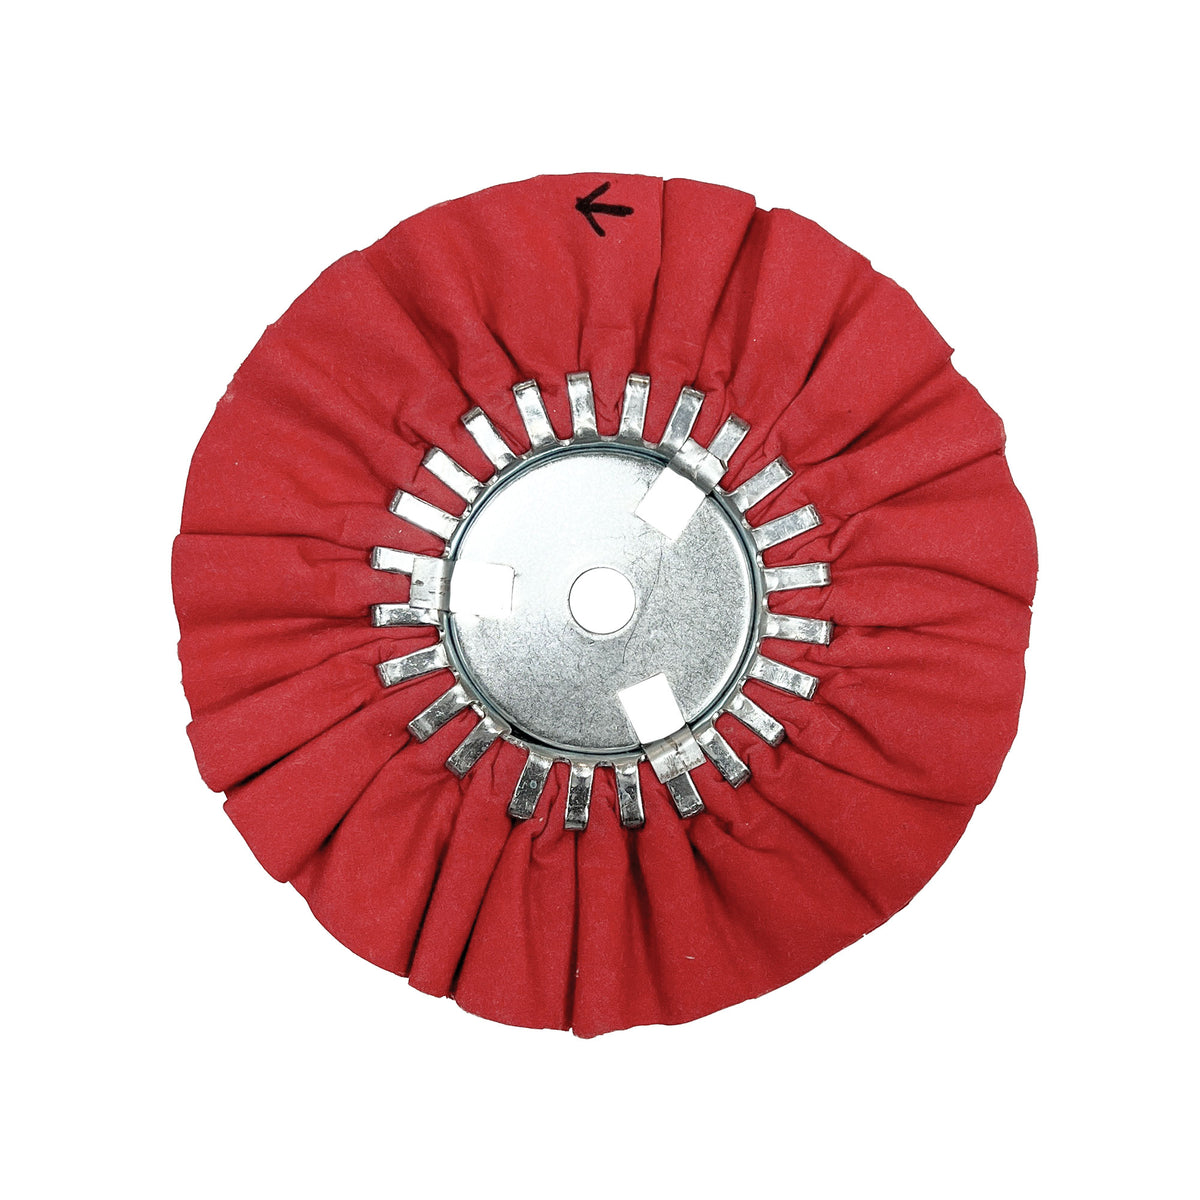 Renegade Products USA Red Airway Buffing Wheel with Center Plate - Professional Buffing Tool for Precision Polishing and Finishing